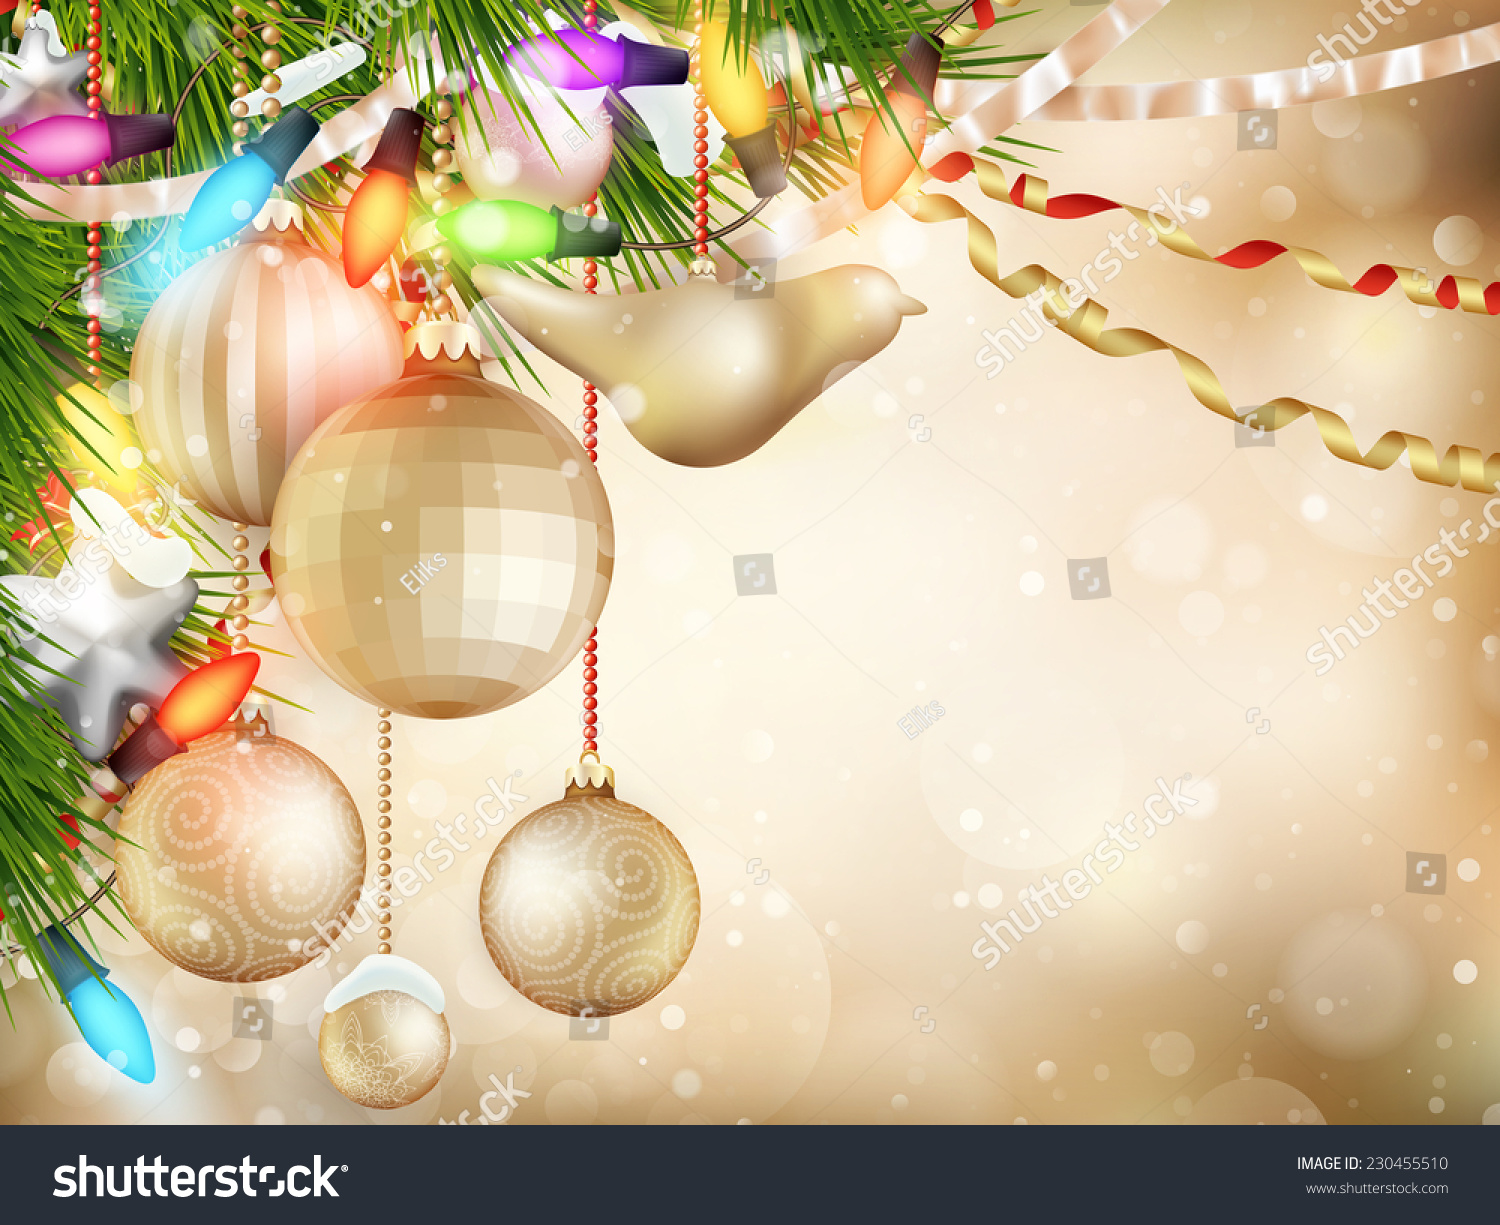 Gold Christmas Background Of De-Focused Lights With Decorated Tree. Eps ...